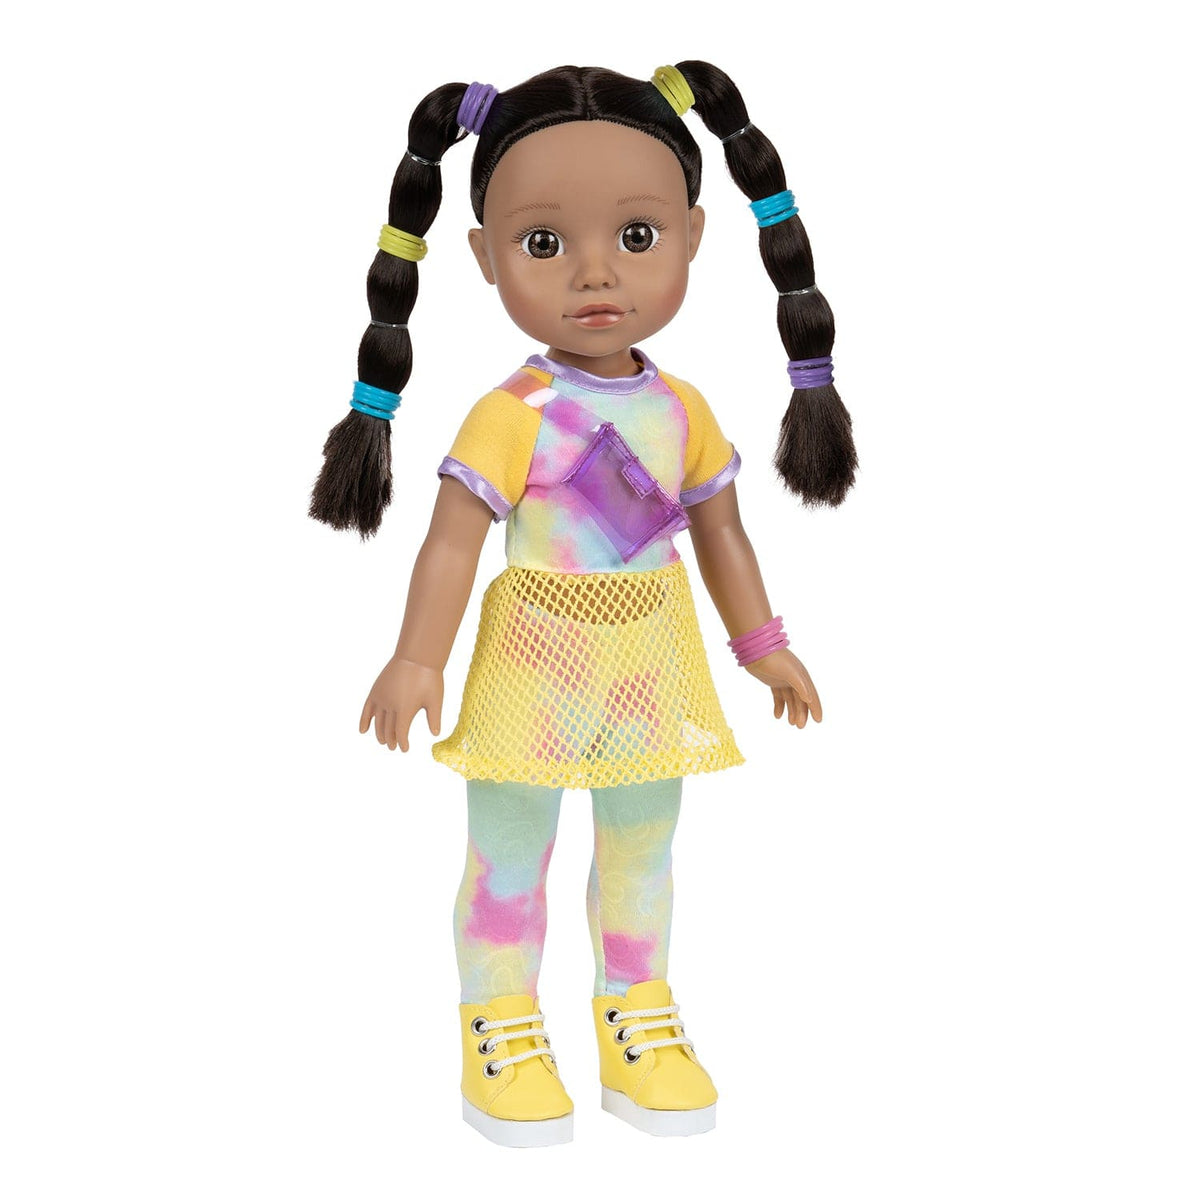 Adora Glow Girls Doll Set with Glow-in-the-Dark Clothes